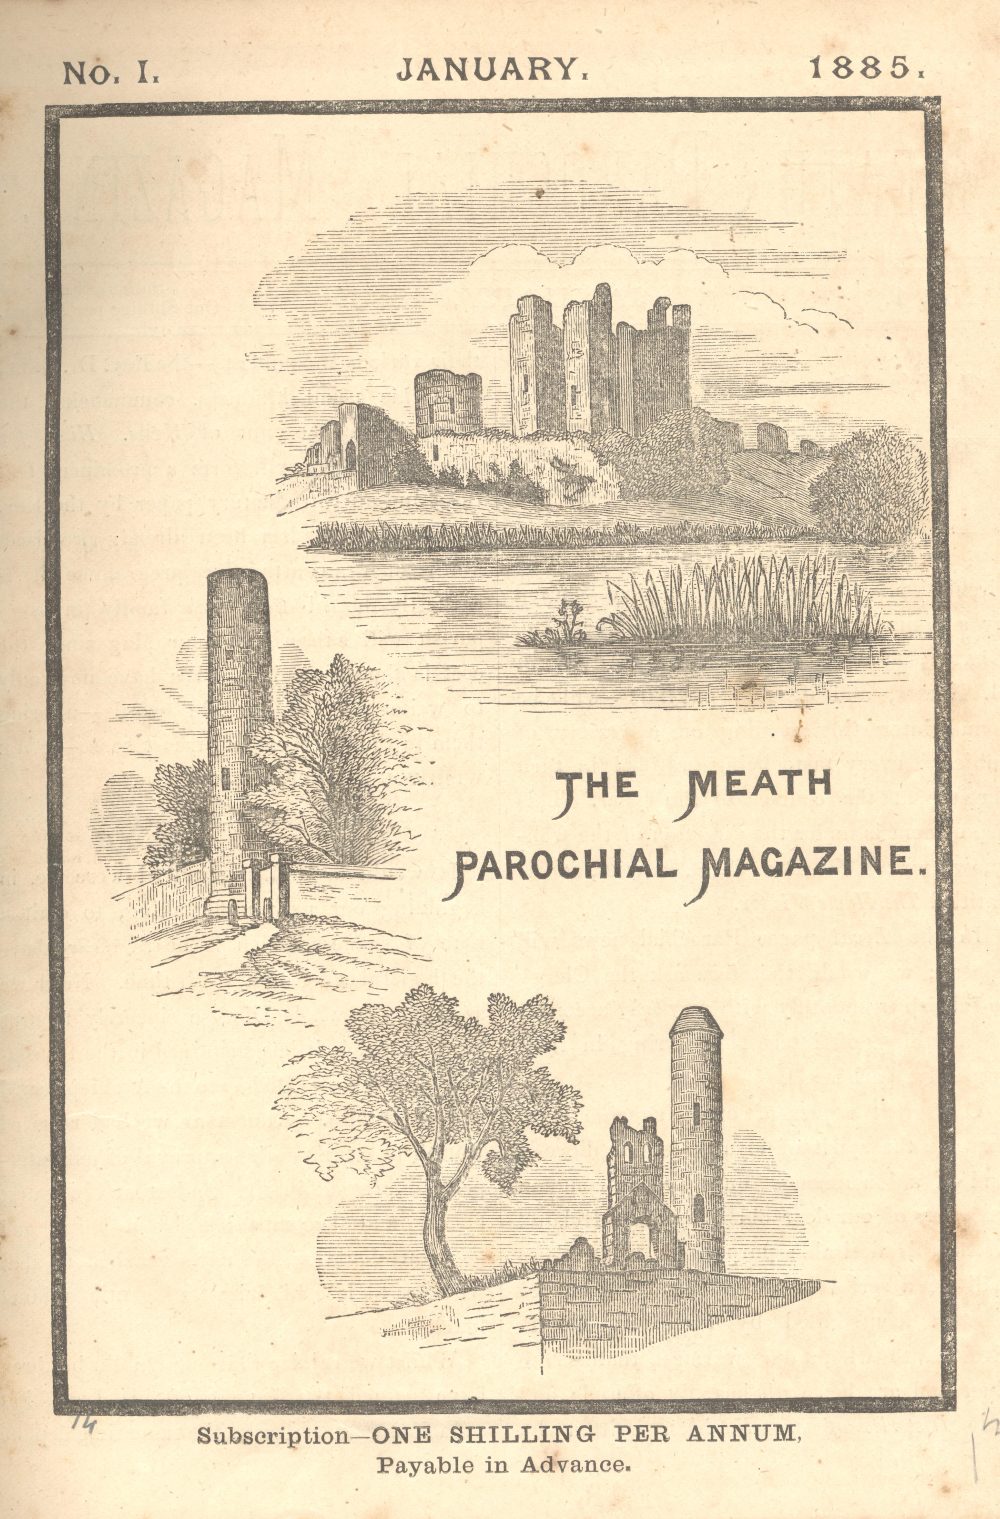 First volume of the Meath Parochial Magazine, 1885, RCB Library D7/17/1.1